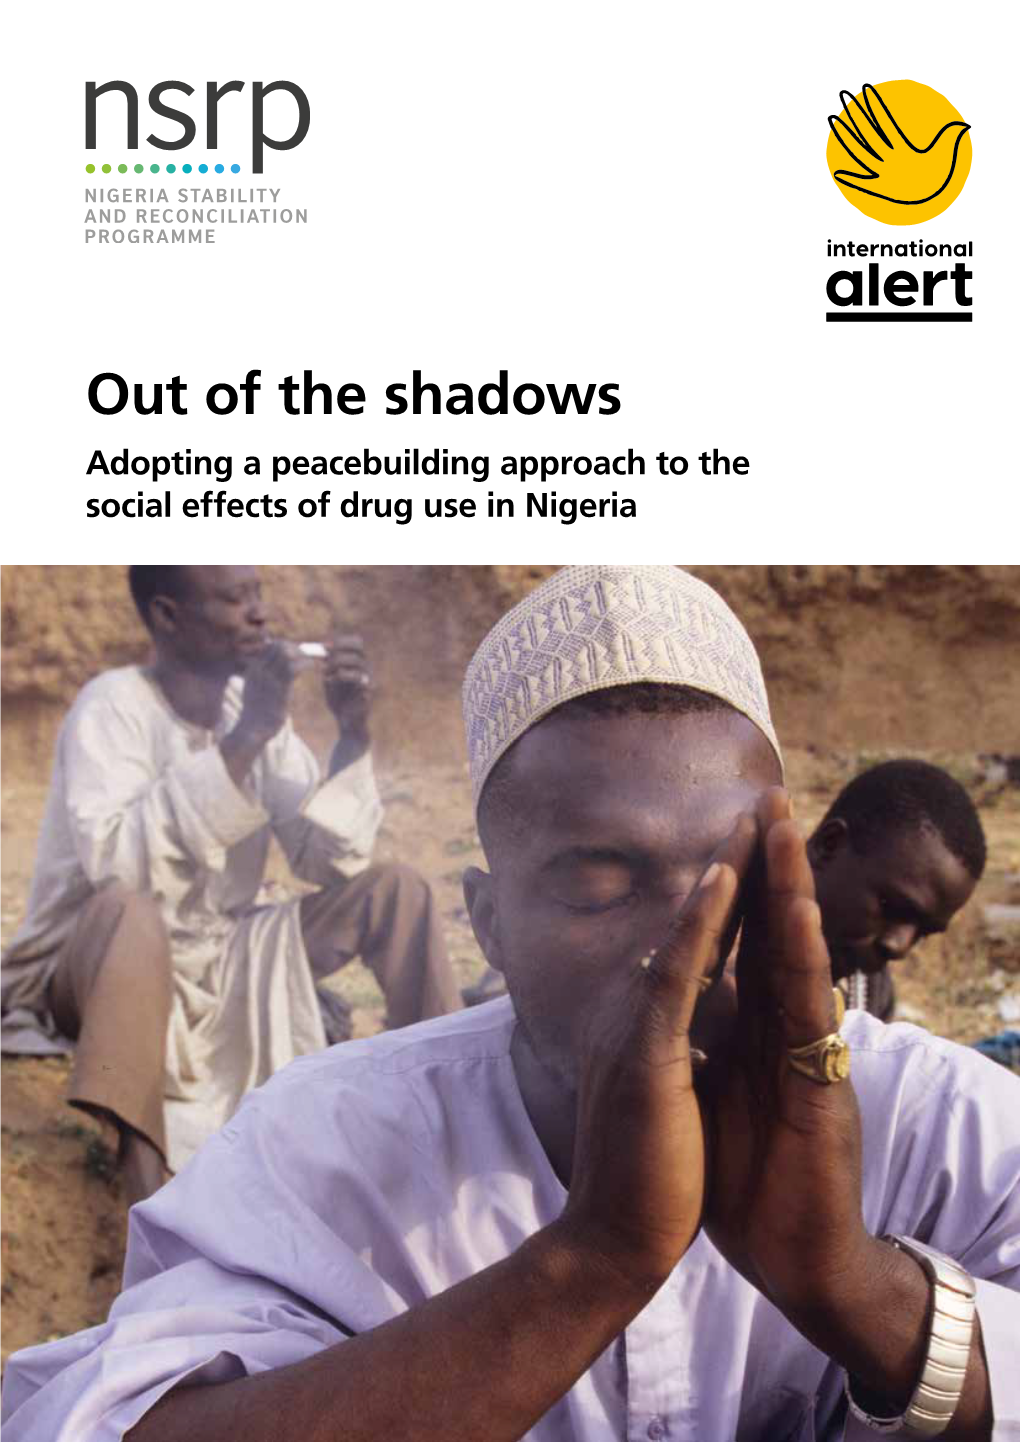 Out of the Shadows Adopting a Peacebuilding Approach to the Social Effects of Drug Use in Nigeria